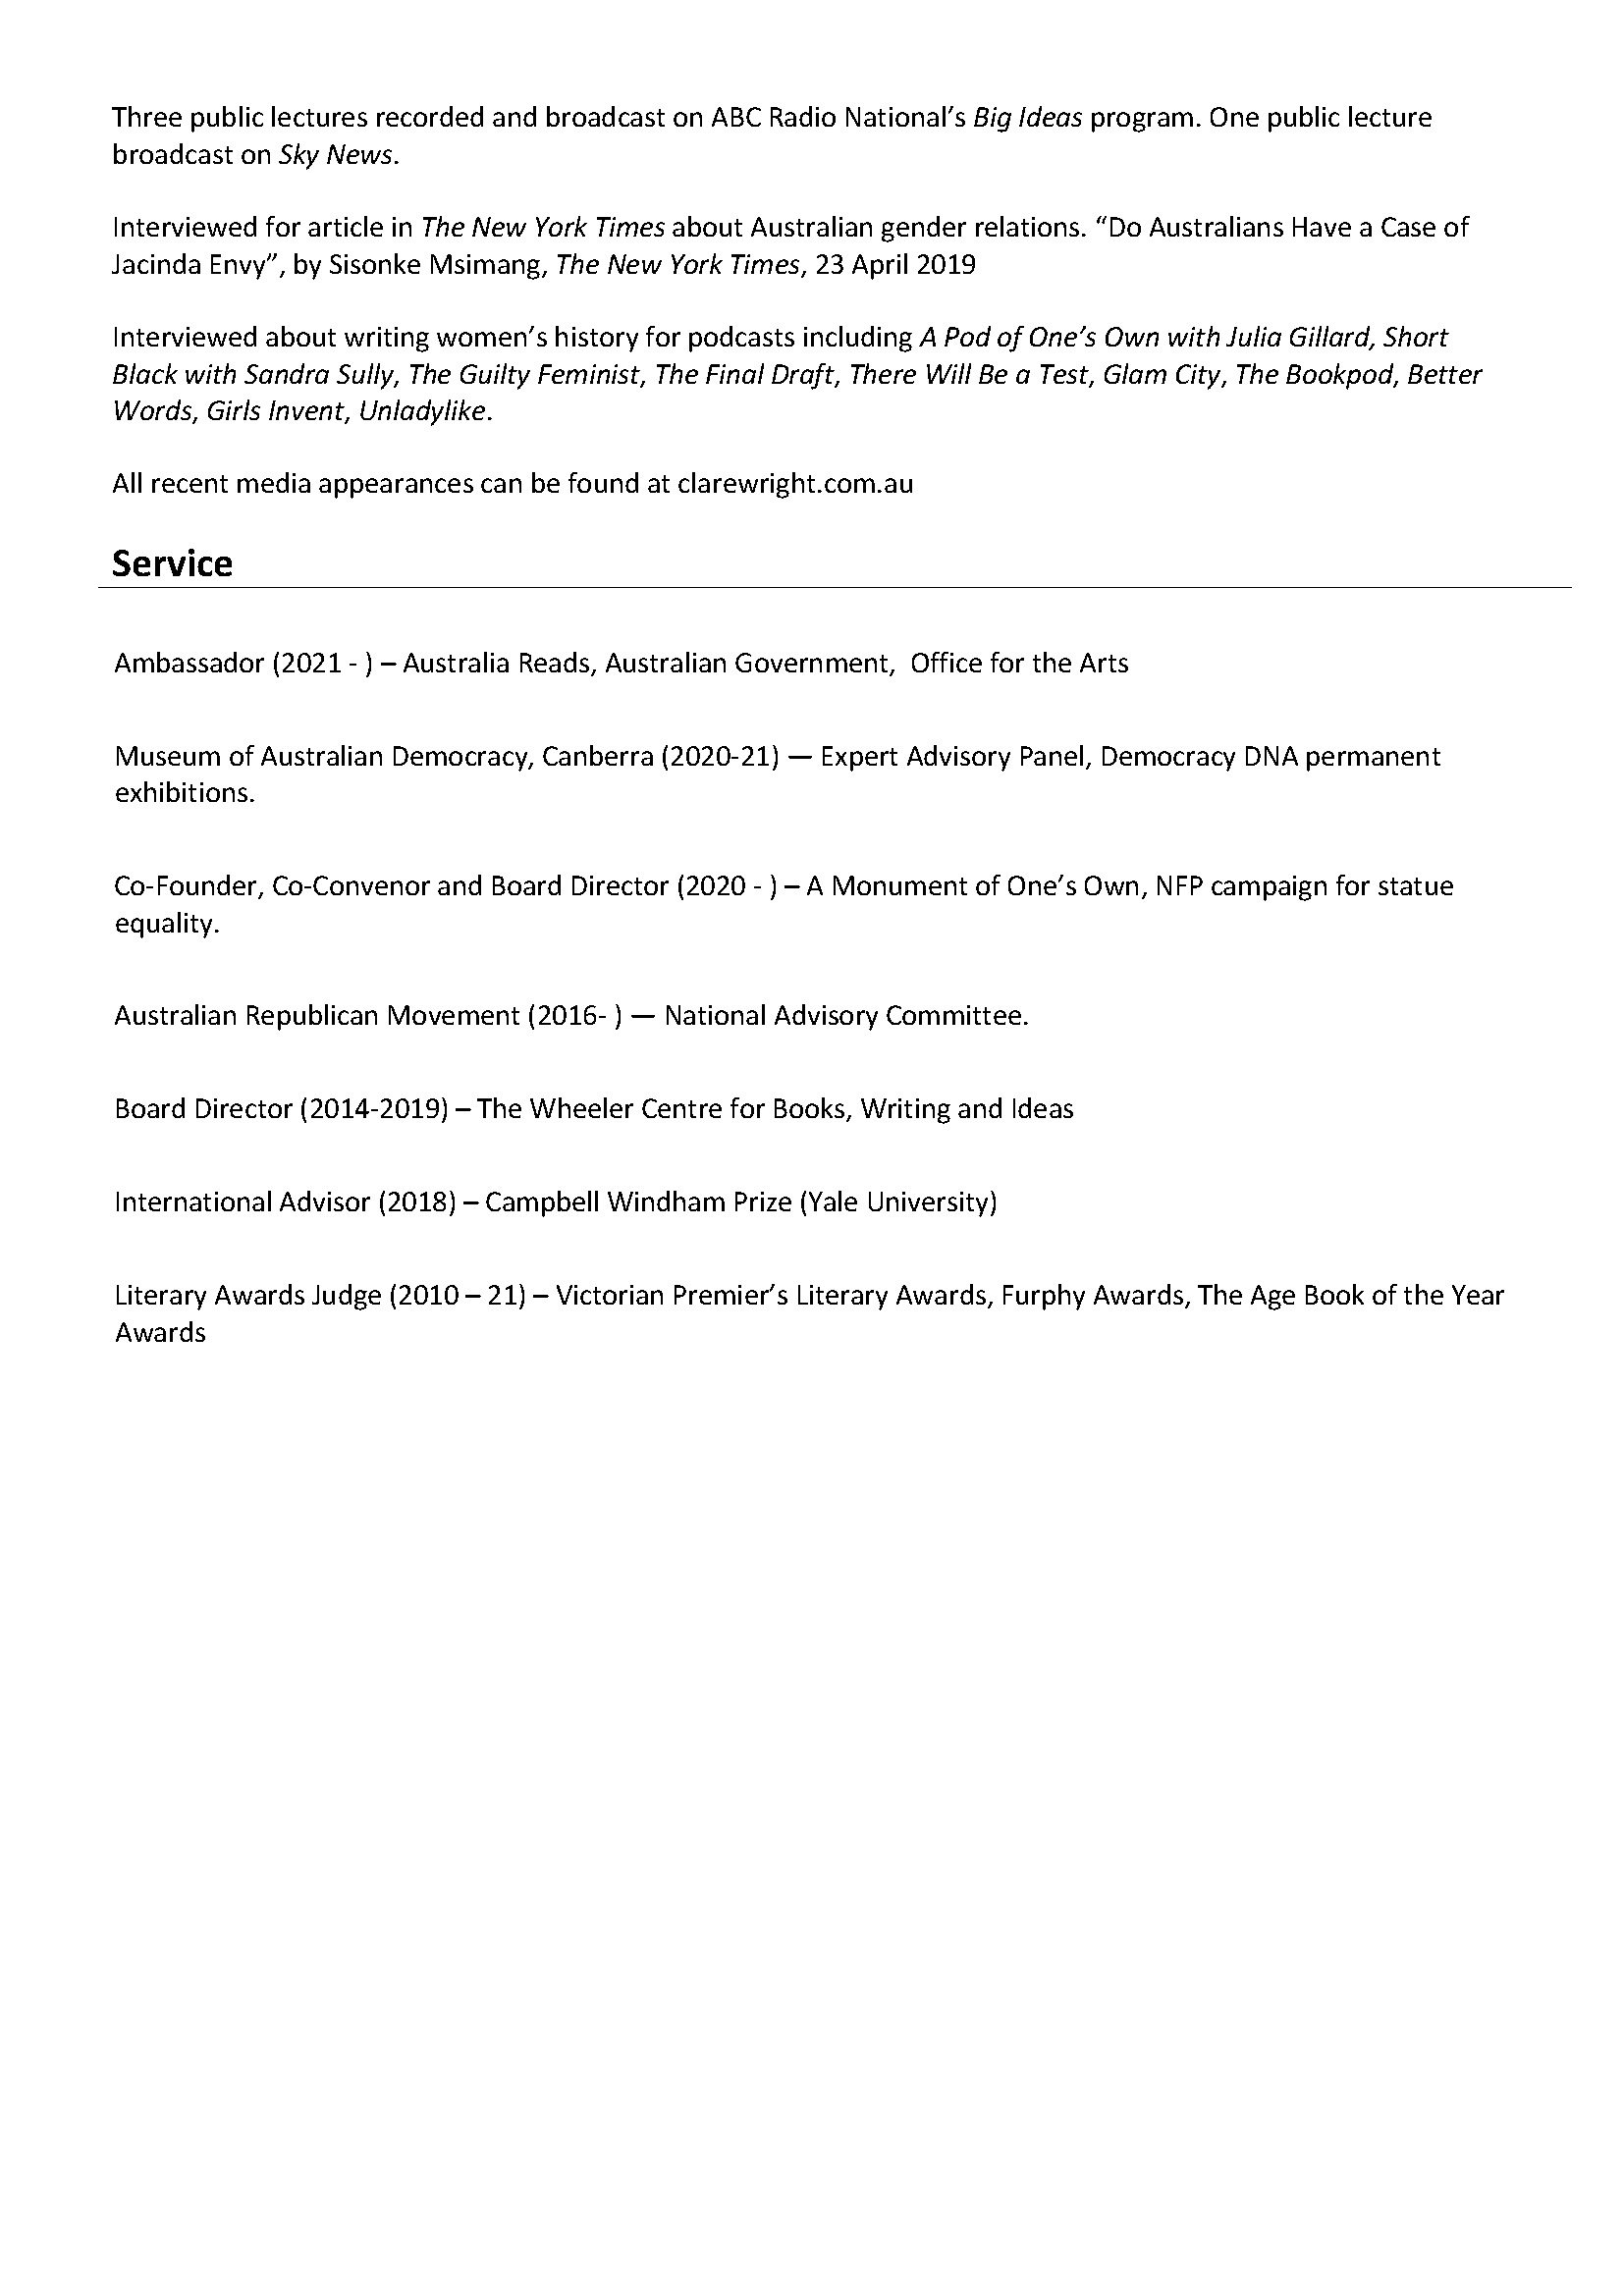 Clare Wright CV 2022_Update 11 June (2)_No phone number_Page_8.jpg